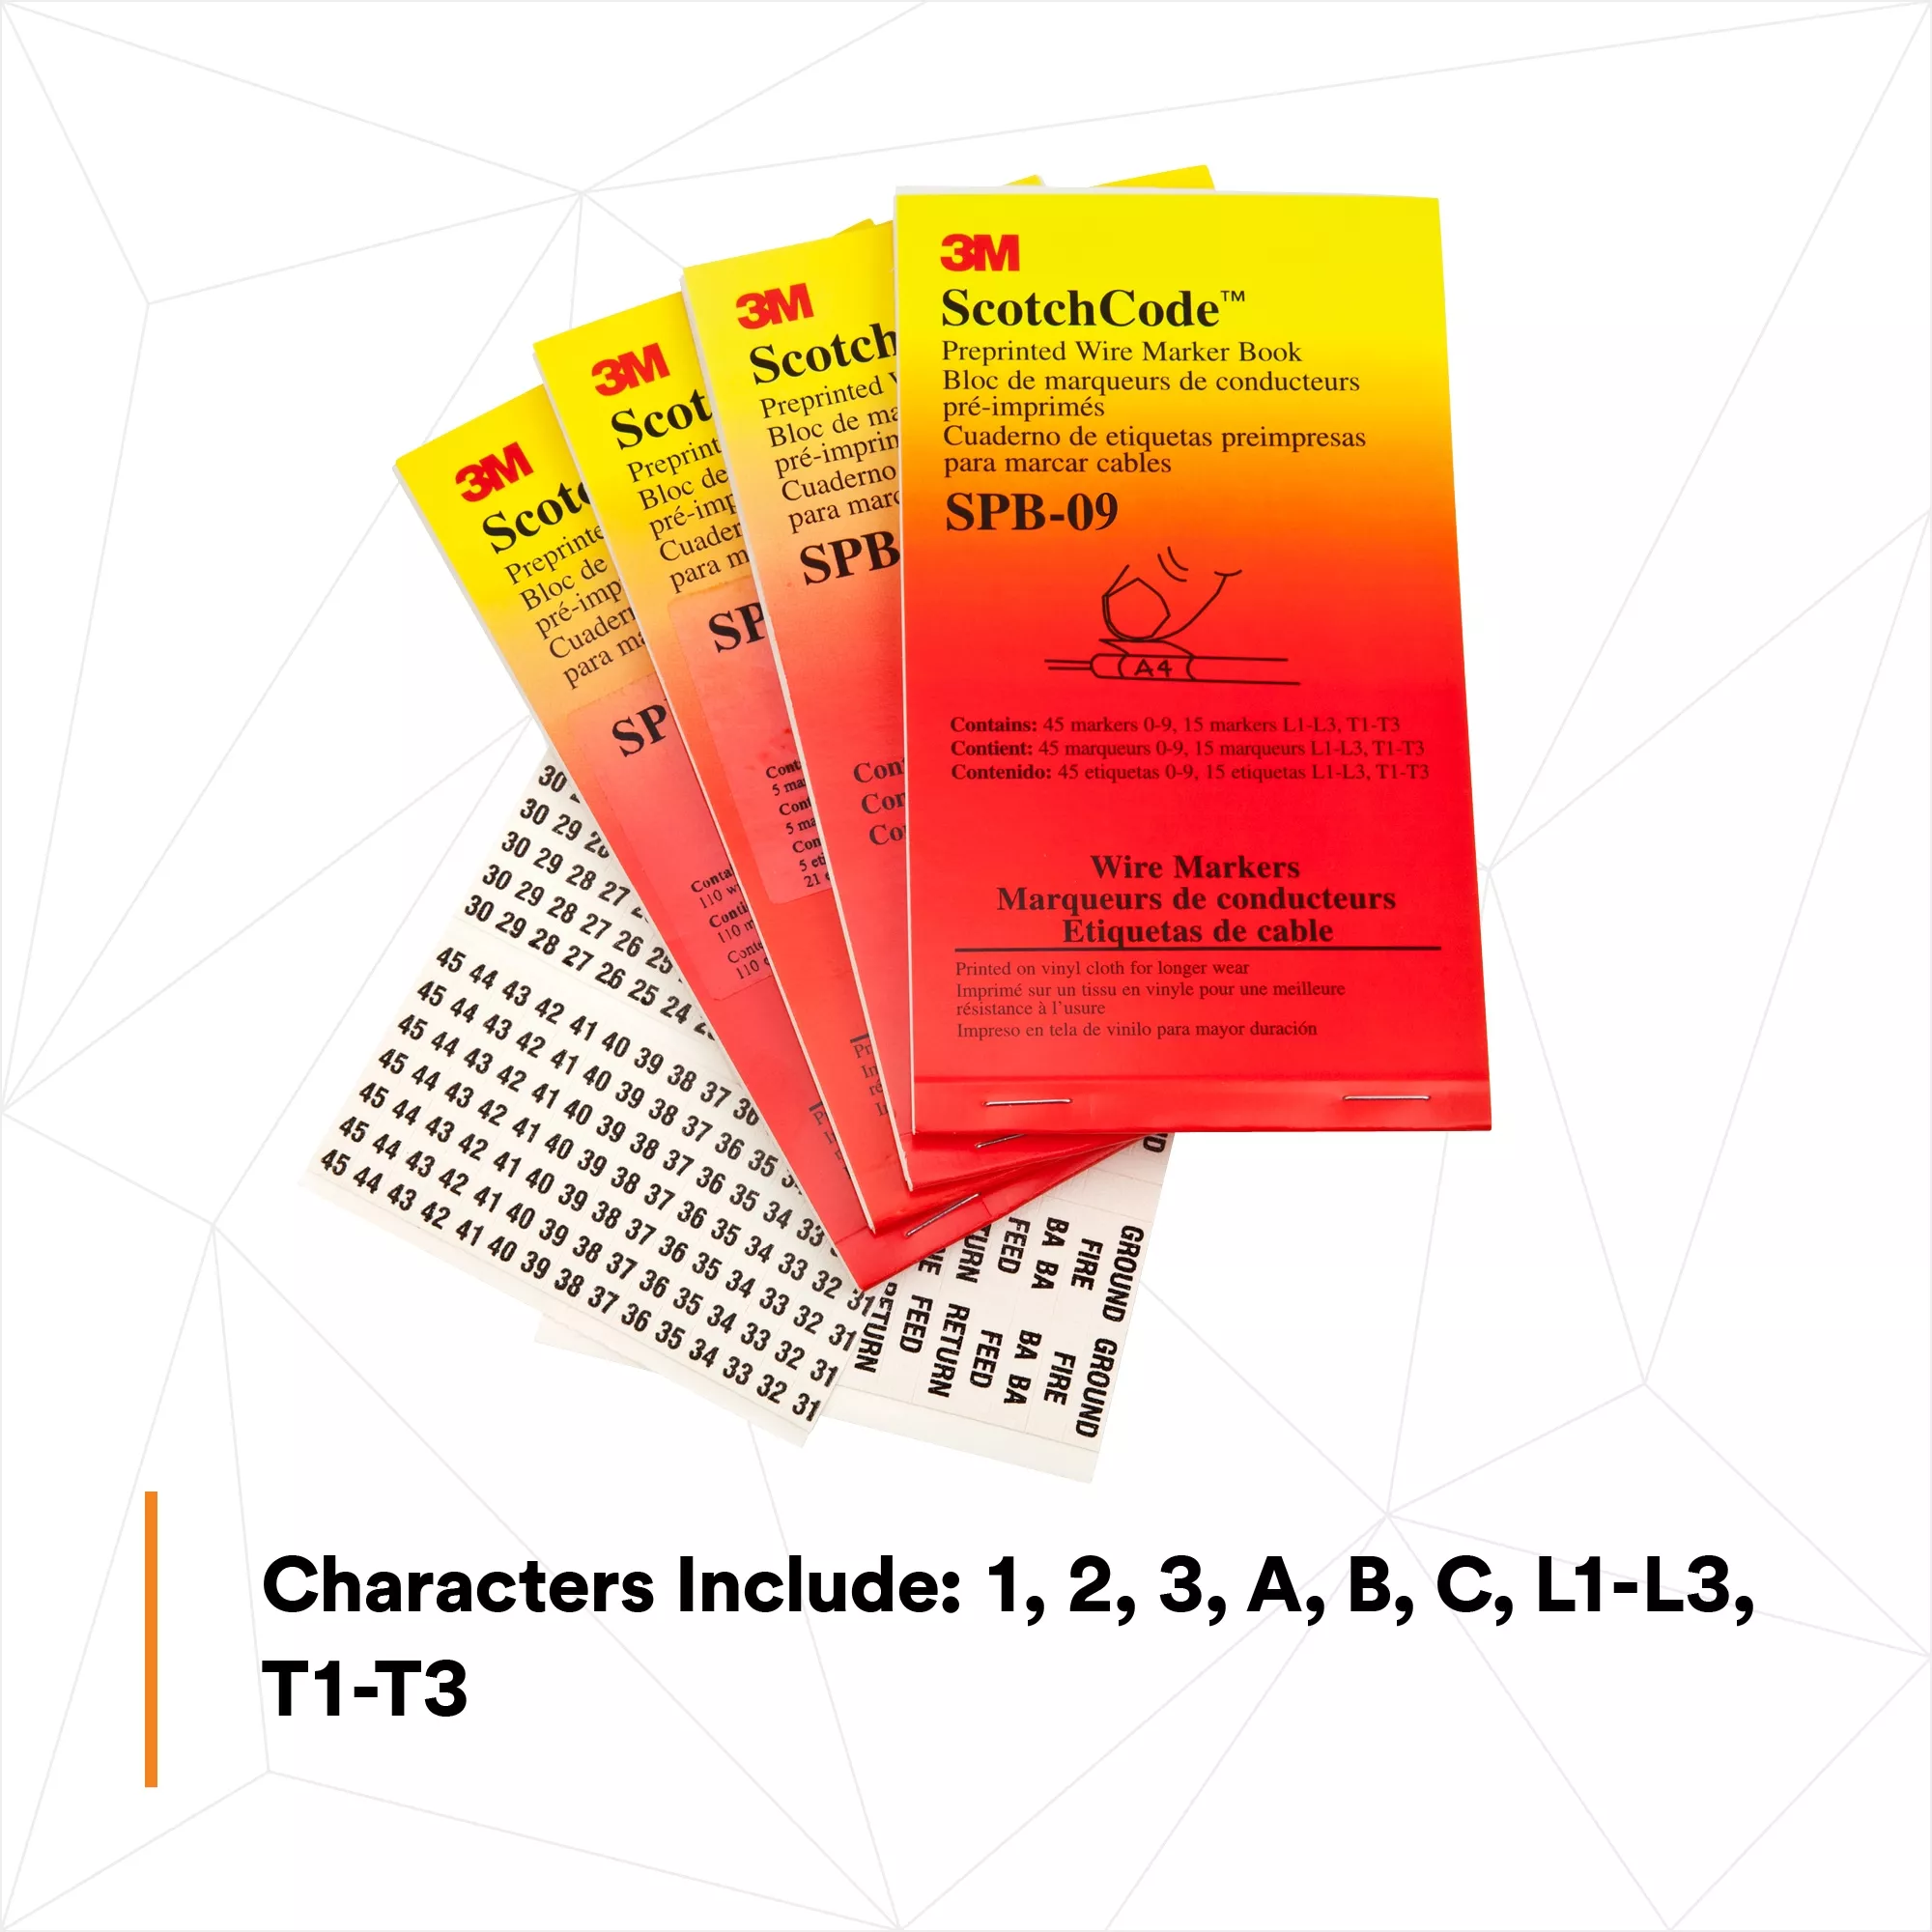 Product Number SPB-09 | 3M™ ScotchCode™ Pre-Printed Wire Marker Book SPB-09